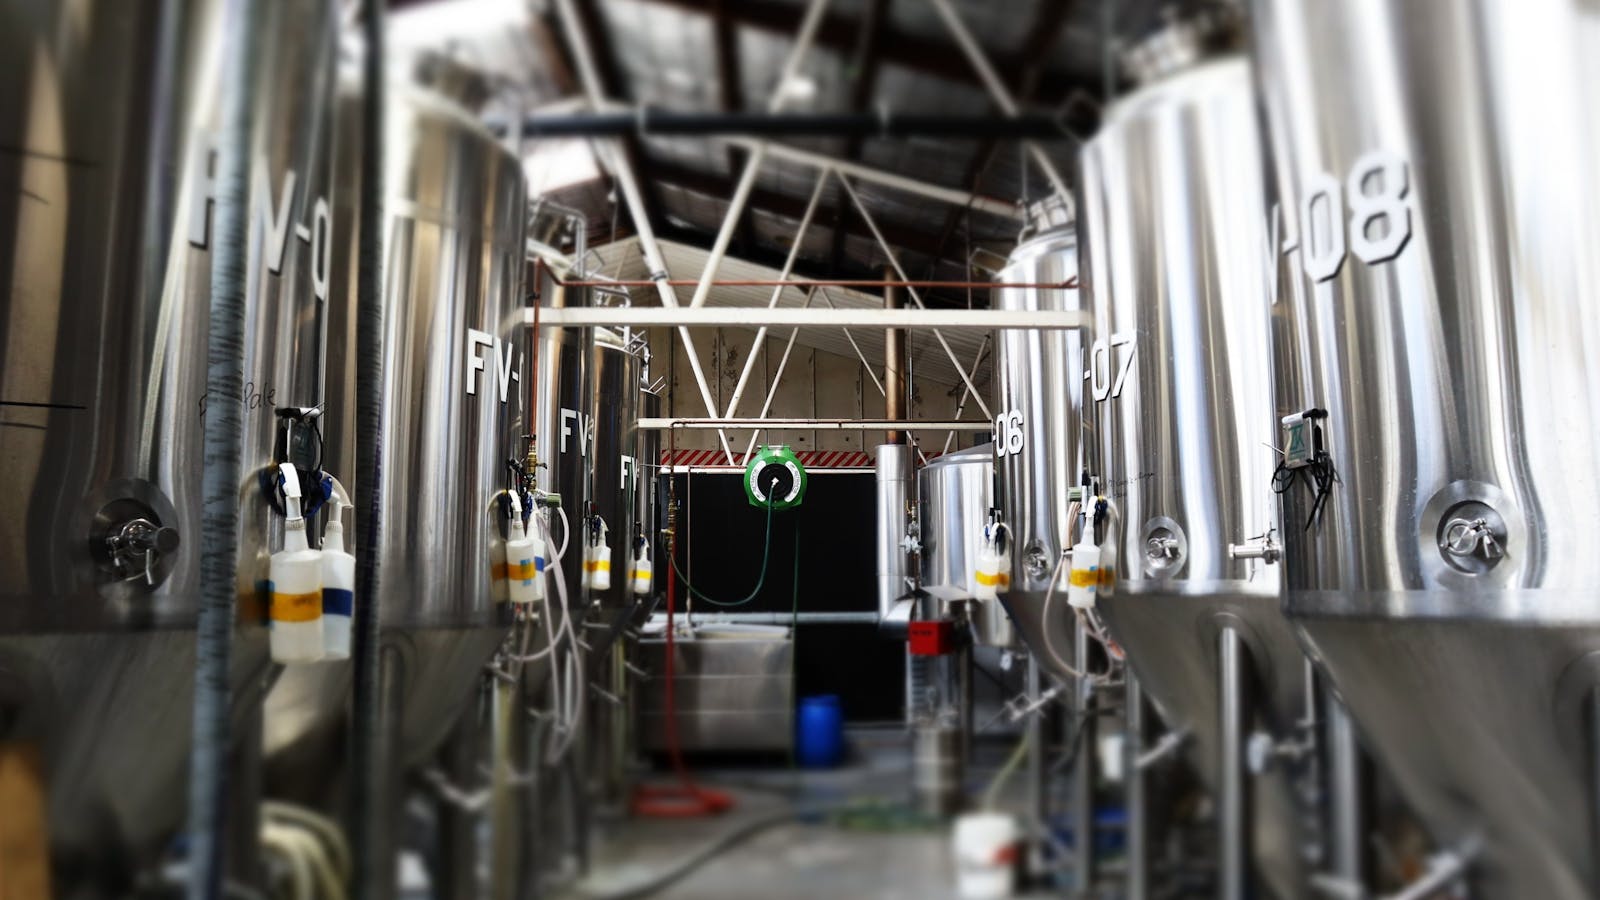 All of our beers are brewed on site - enquiry about a private tour.